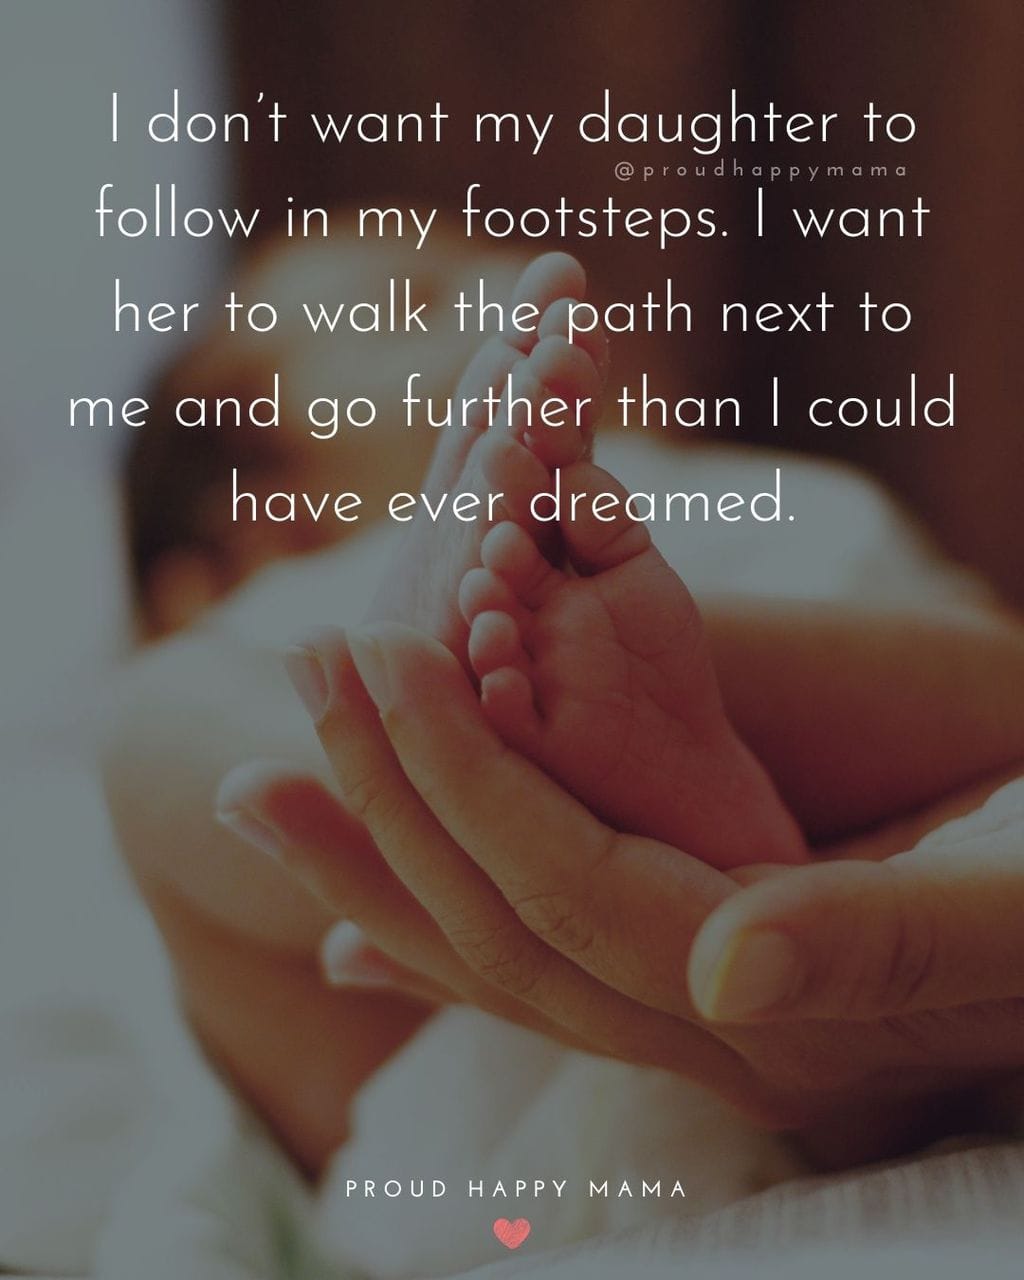 Baby Girl Quotes - I don’t want my daughter to follow in my footsteps. I want her to walk the path next to me and go further than I could have ever dreamed.